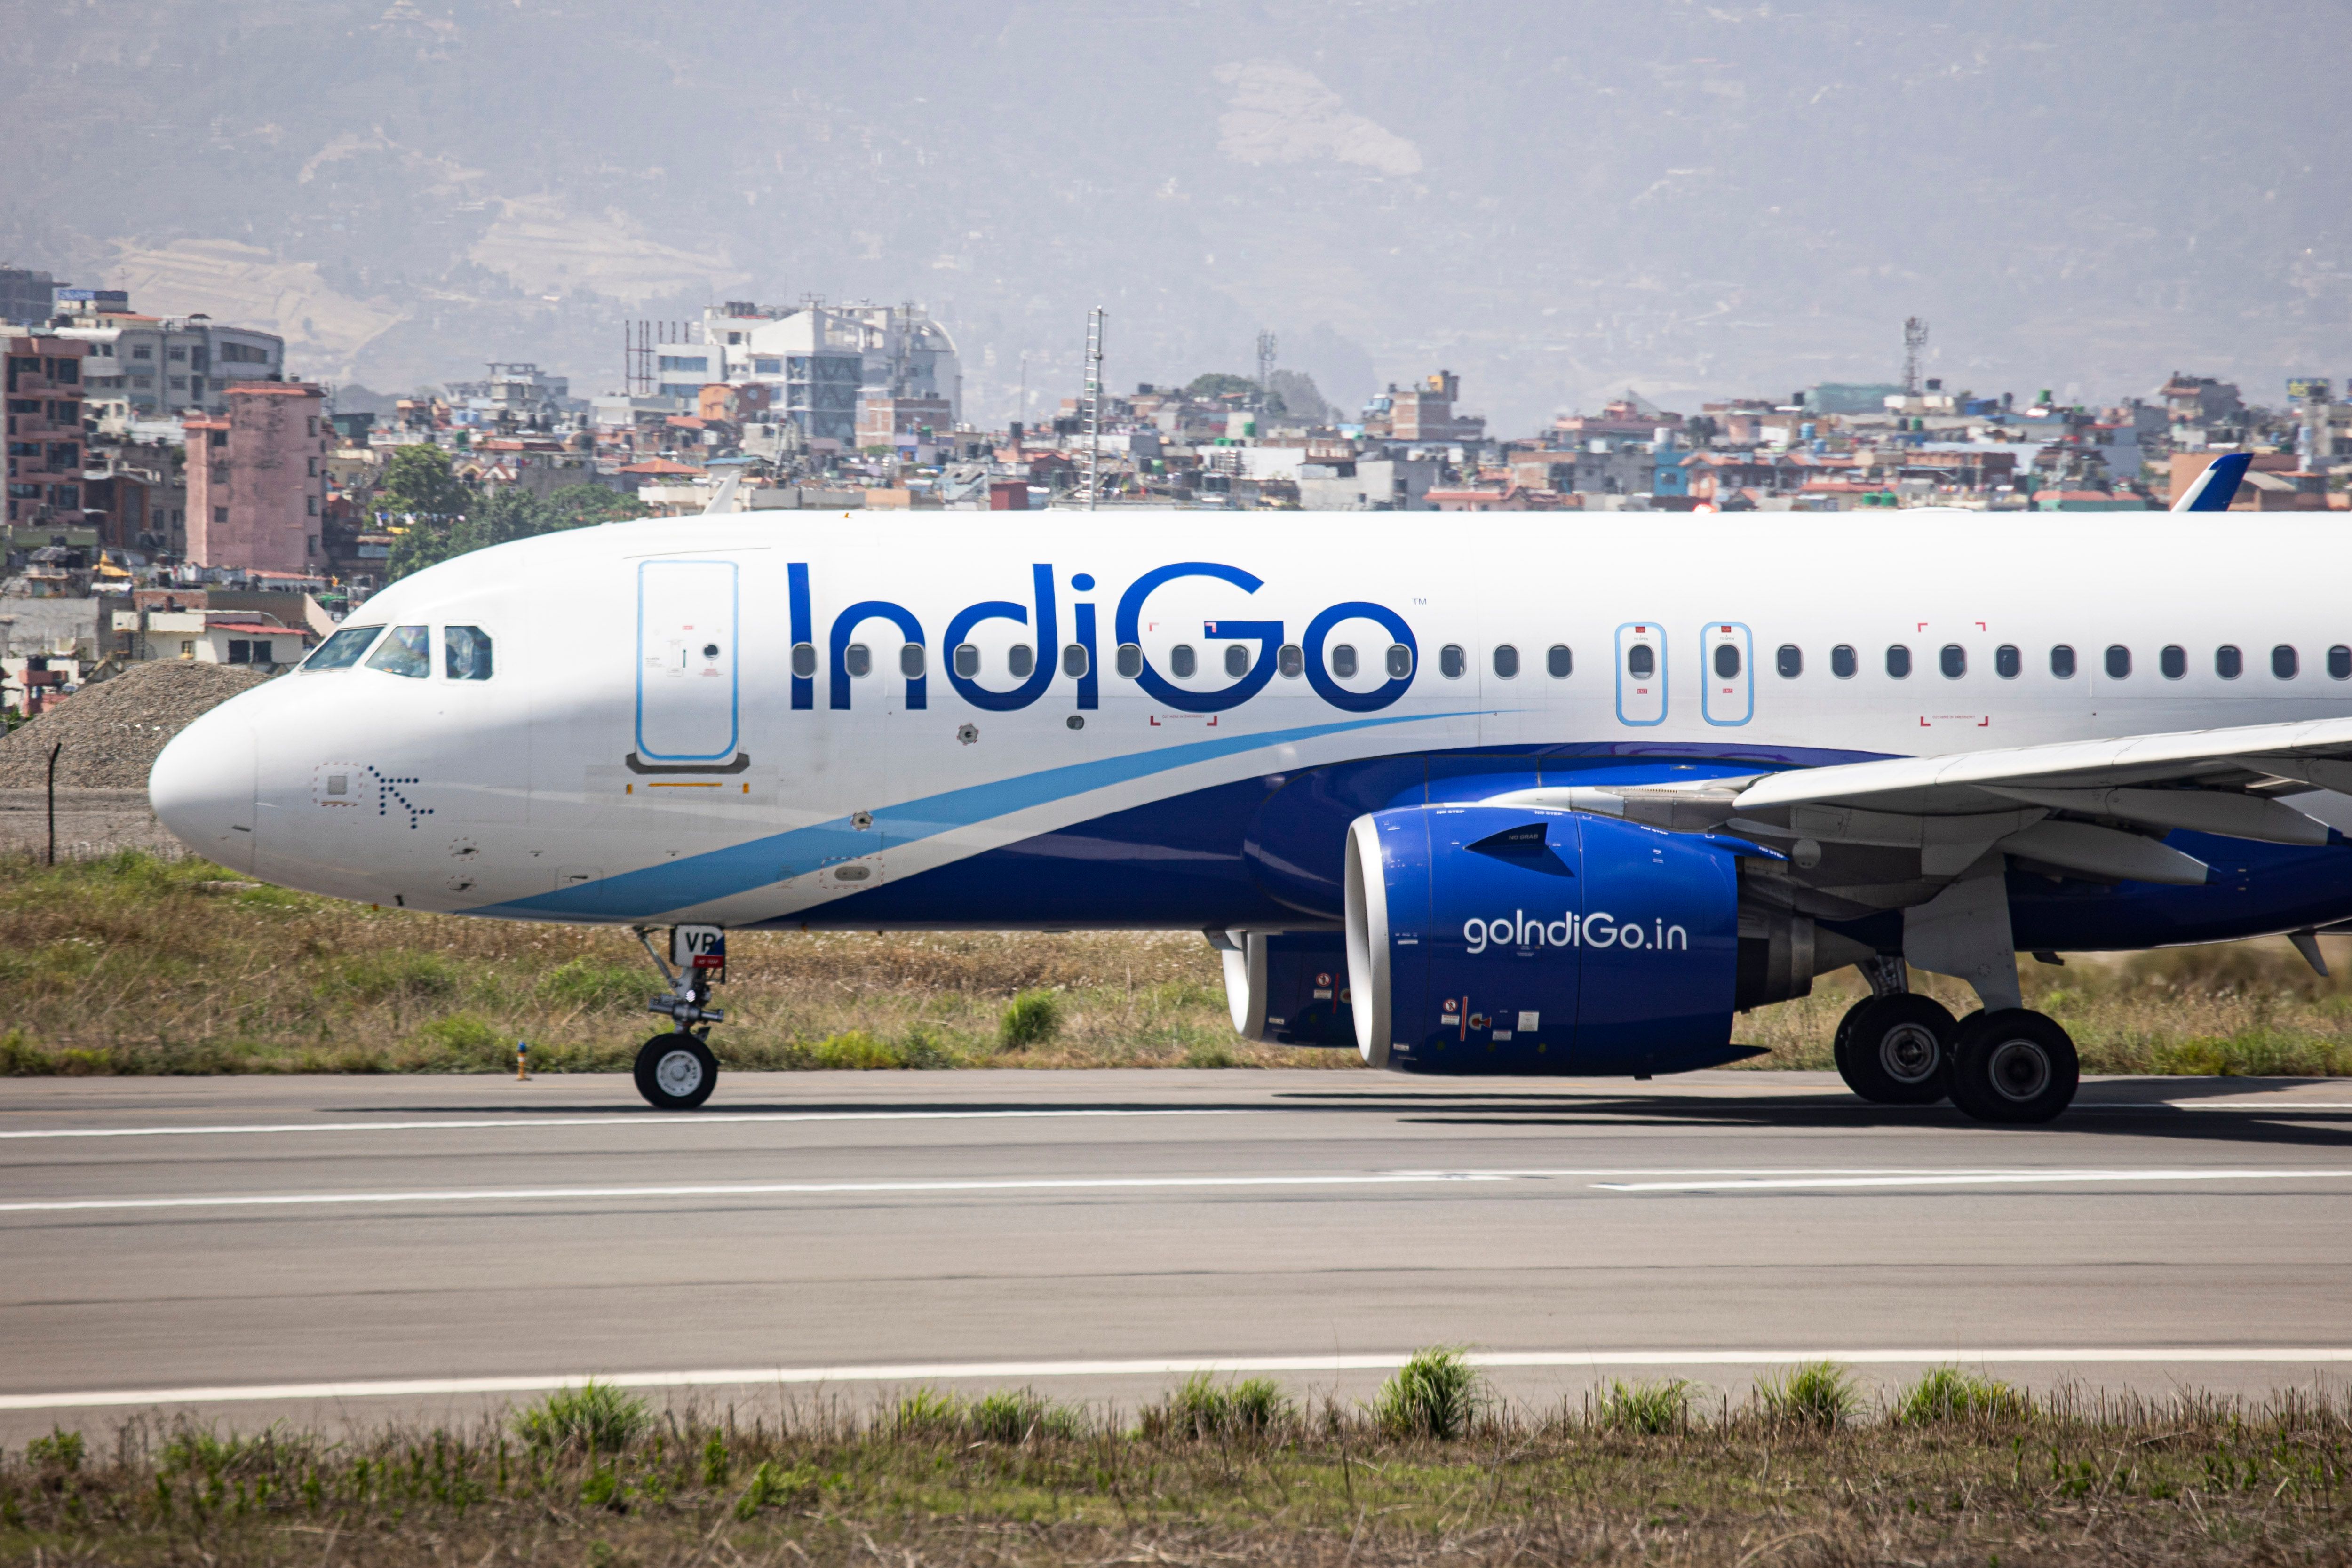 Indigo Airbus A320neo aircraft as seen on the runway and taxiway taxiing for departure at Kathmandu Tribhuvan International Airport.